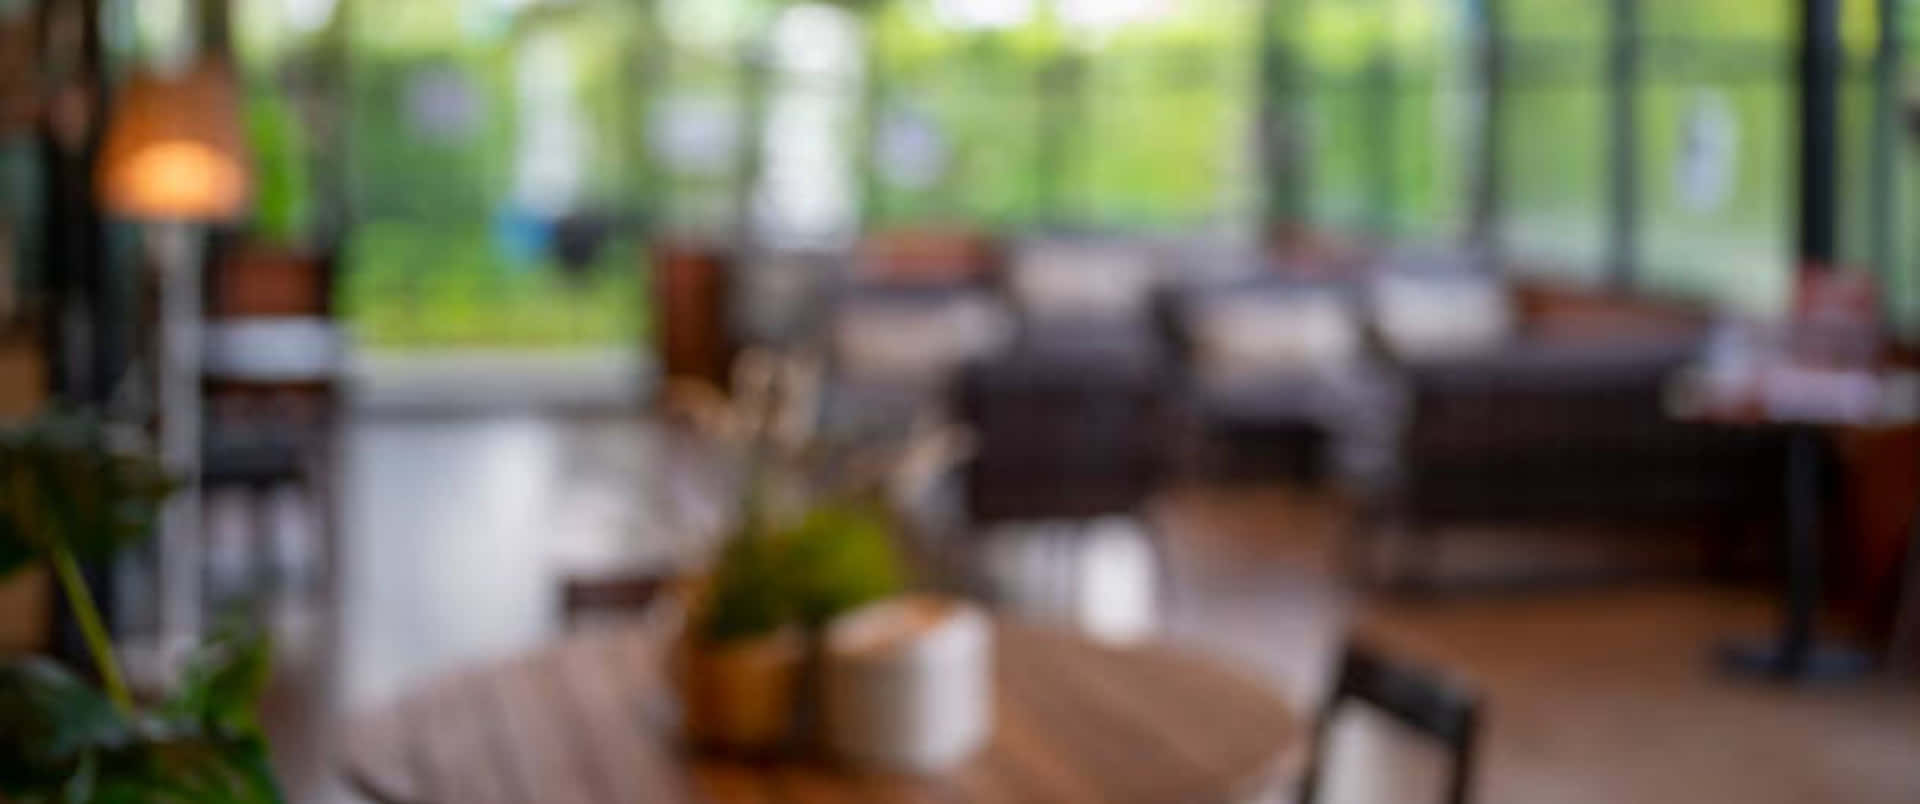 A Blurry Image Of A Restaurant With Tables And Chairs